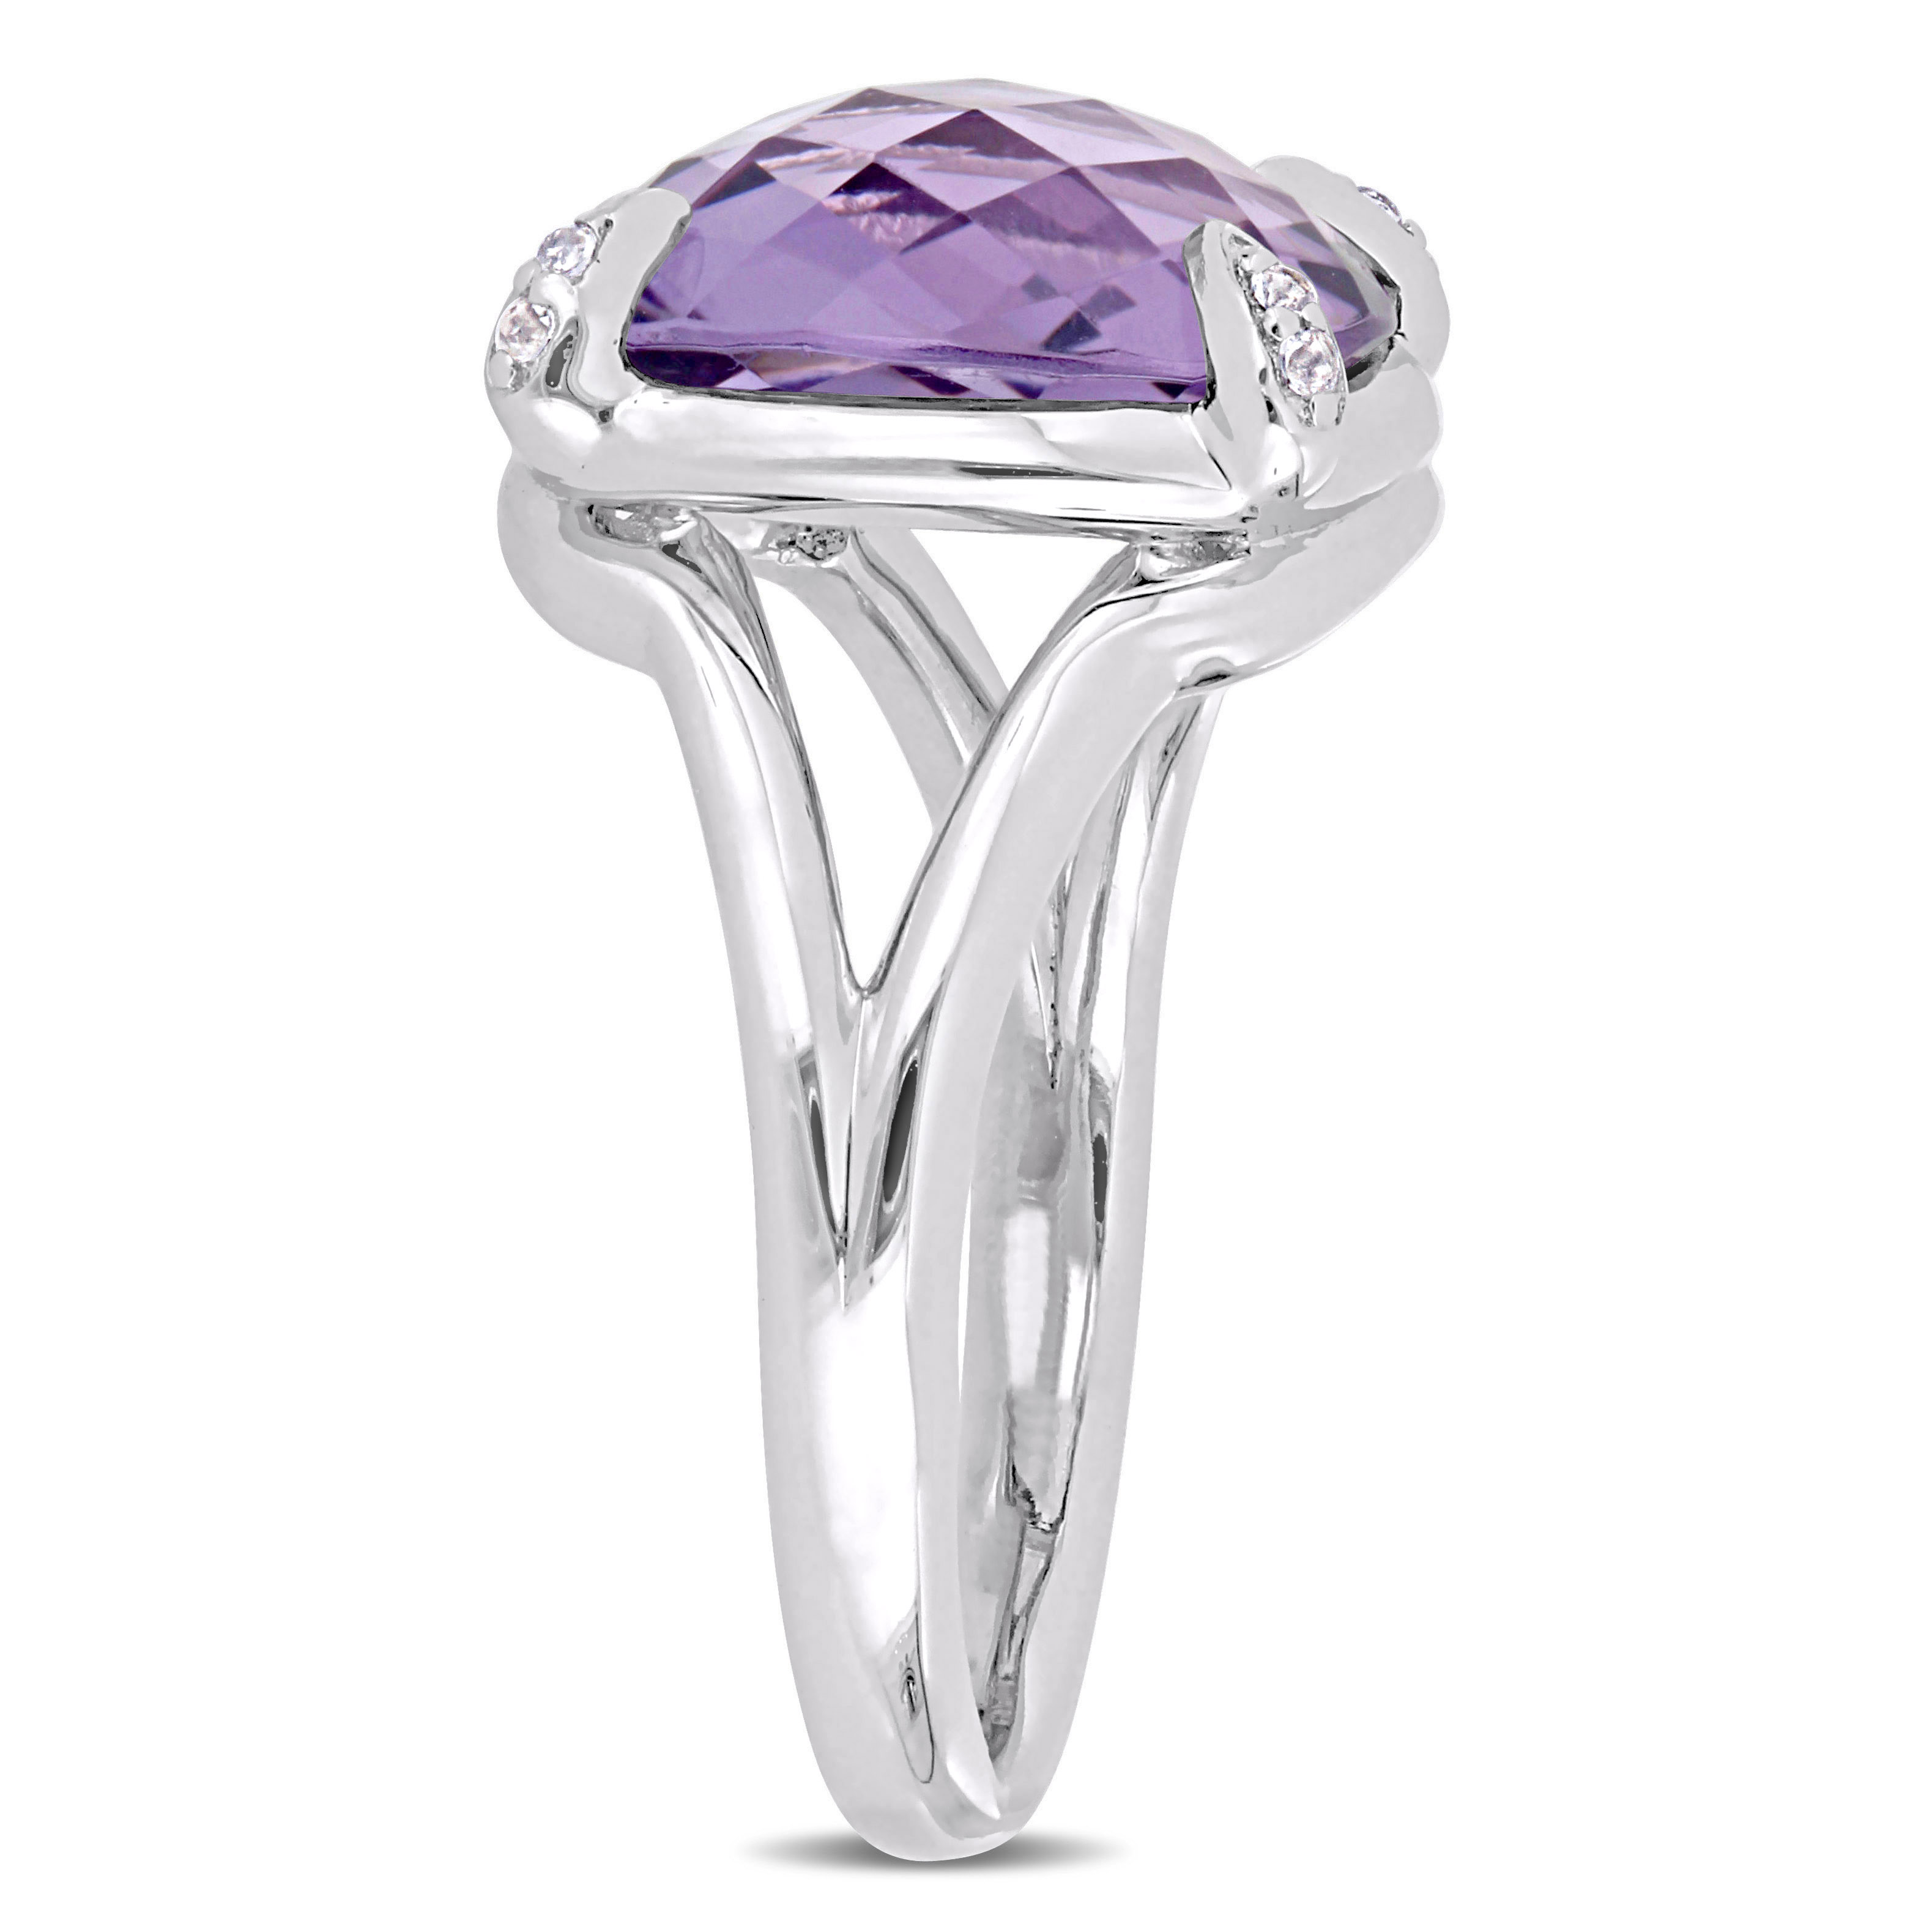 7 4/5 CT TGW Amethyst and White Topaz Split Shank Cocktail Ring in Sterling Silver